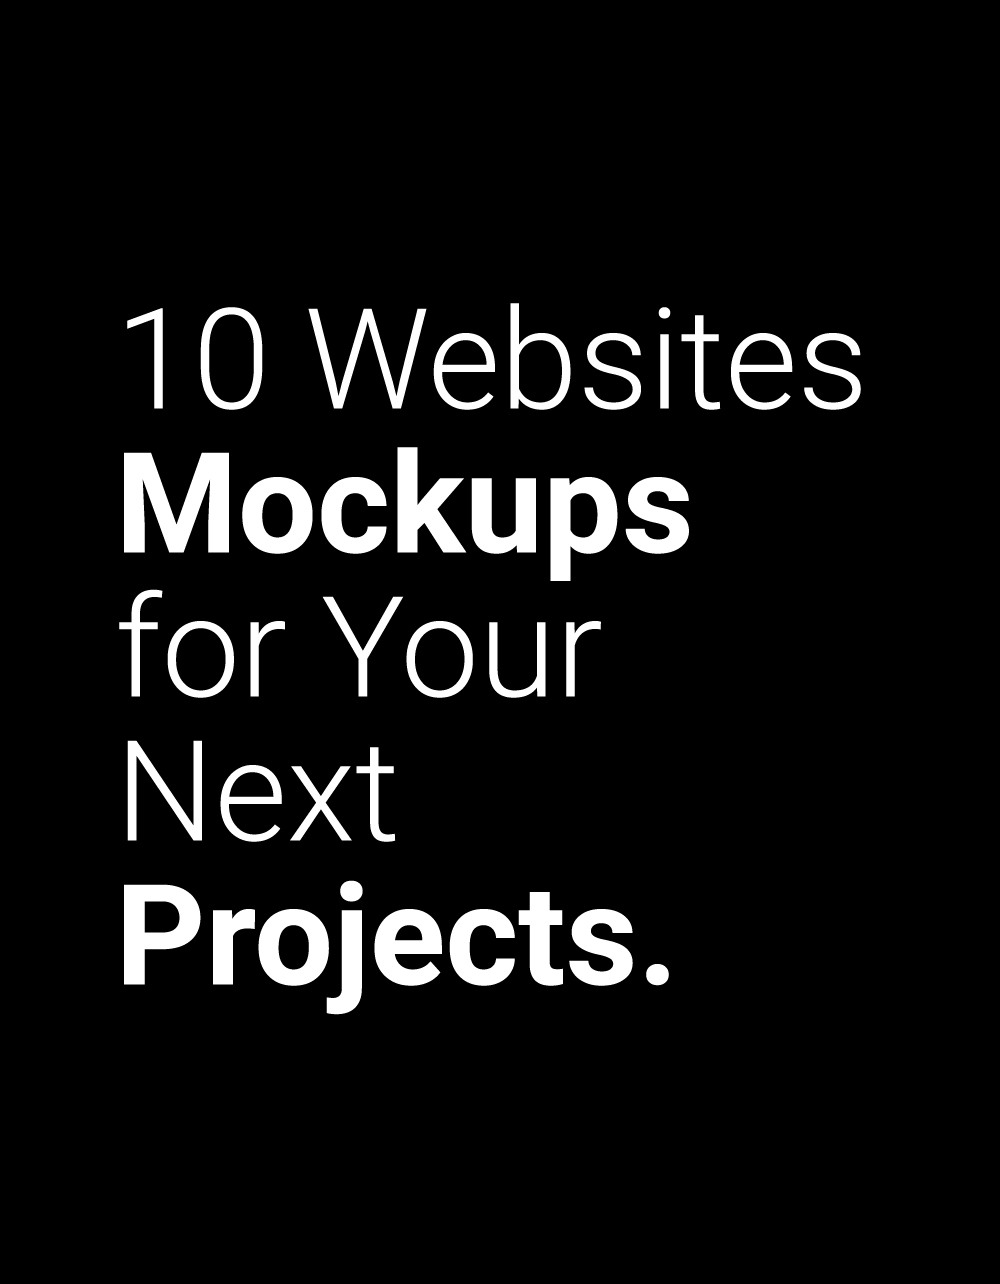 this phrase: 10 Websites Mockups for Your Next Projects. in white color within a Black background.